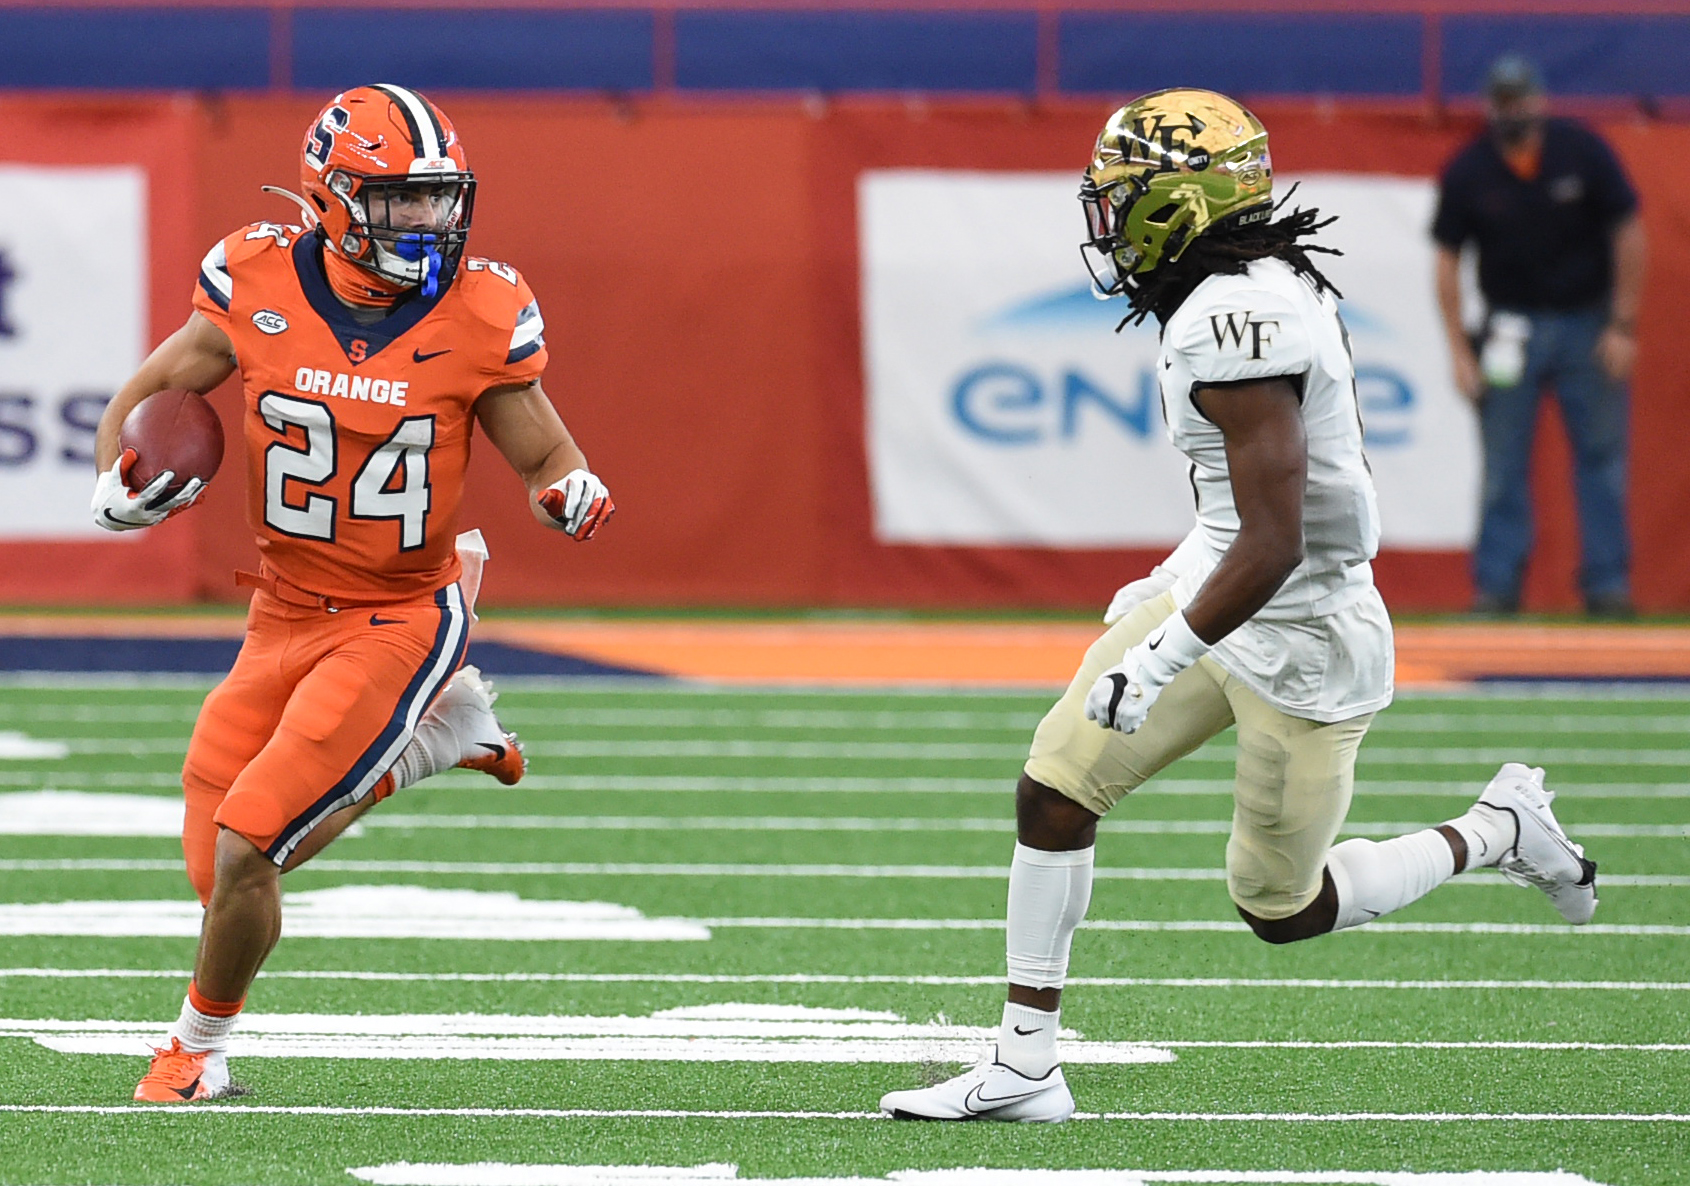 Syracuse blown out by Wake Forest, 38-14, in another predictable game 